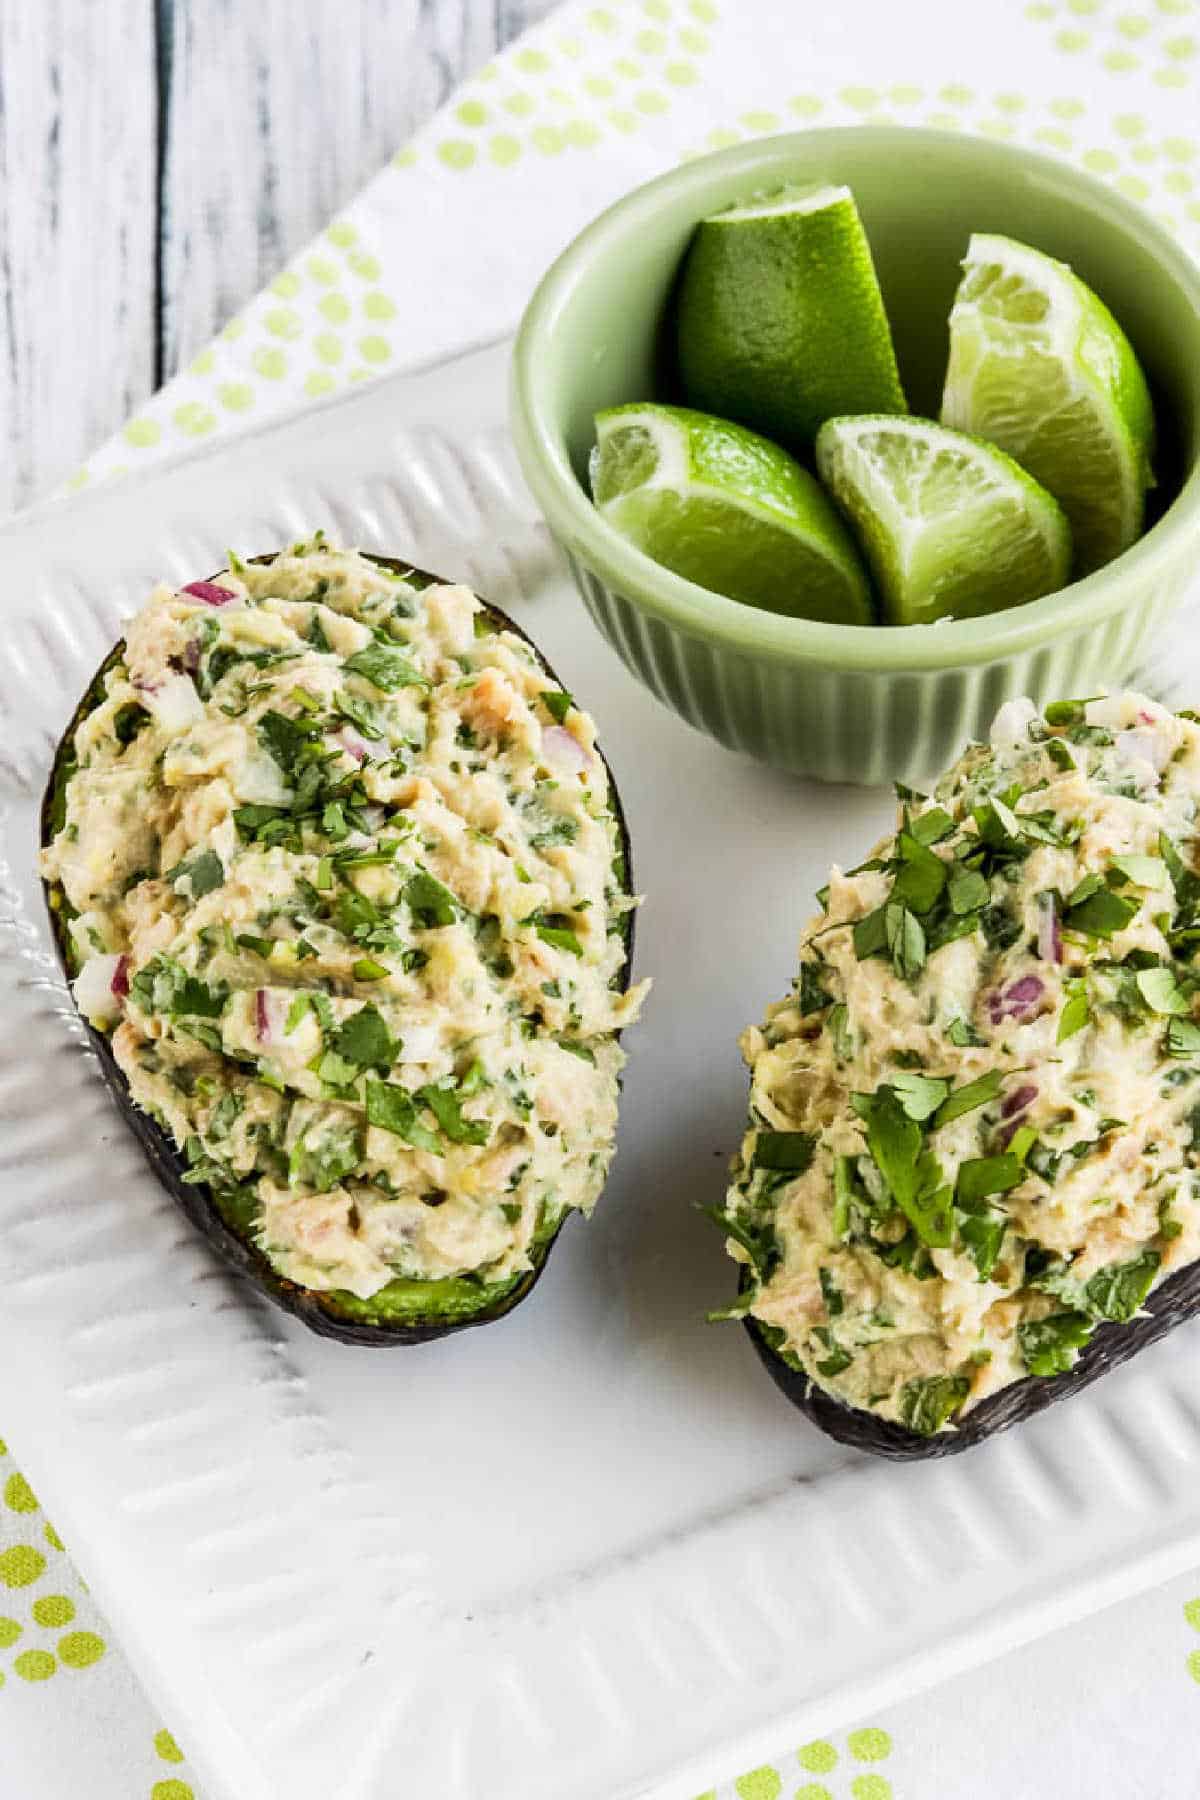 Tuna Stuffed Avocado shown with two avocado halves on serving plate with cut limes